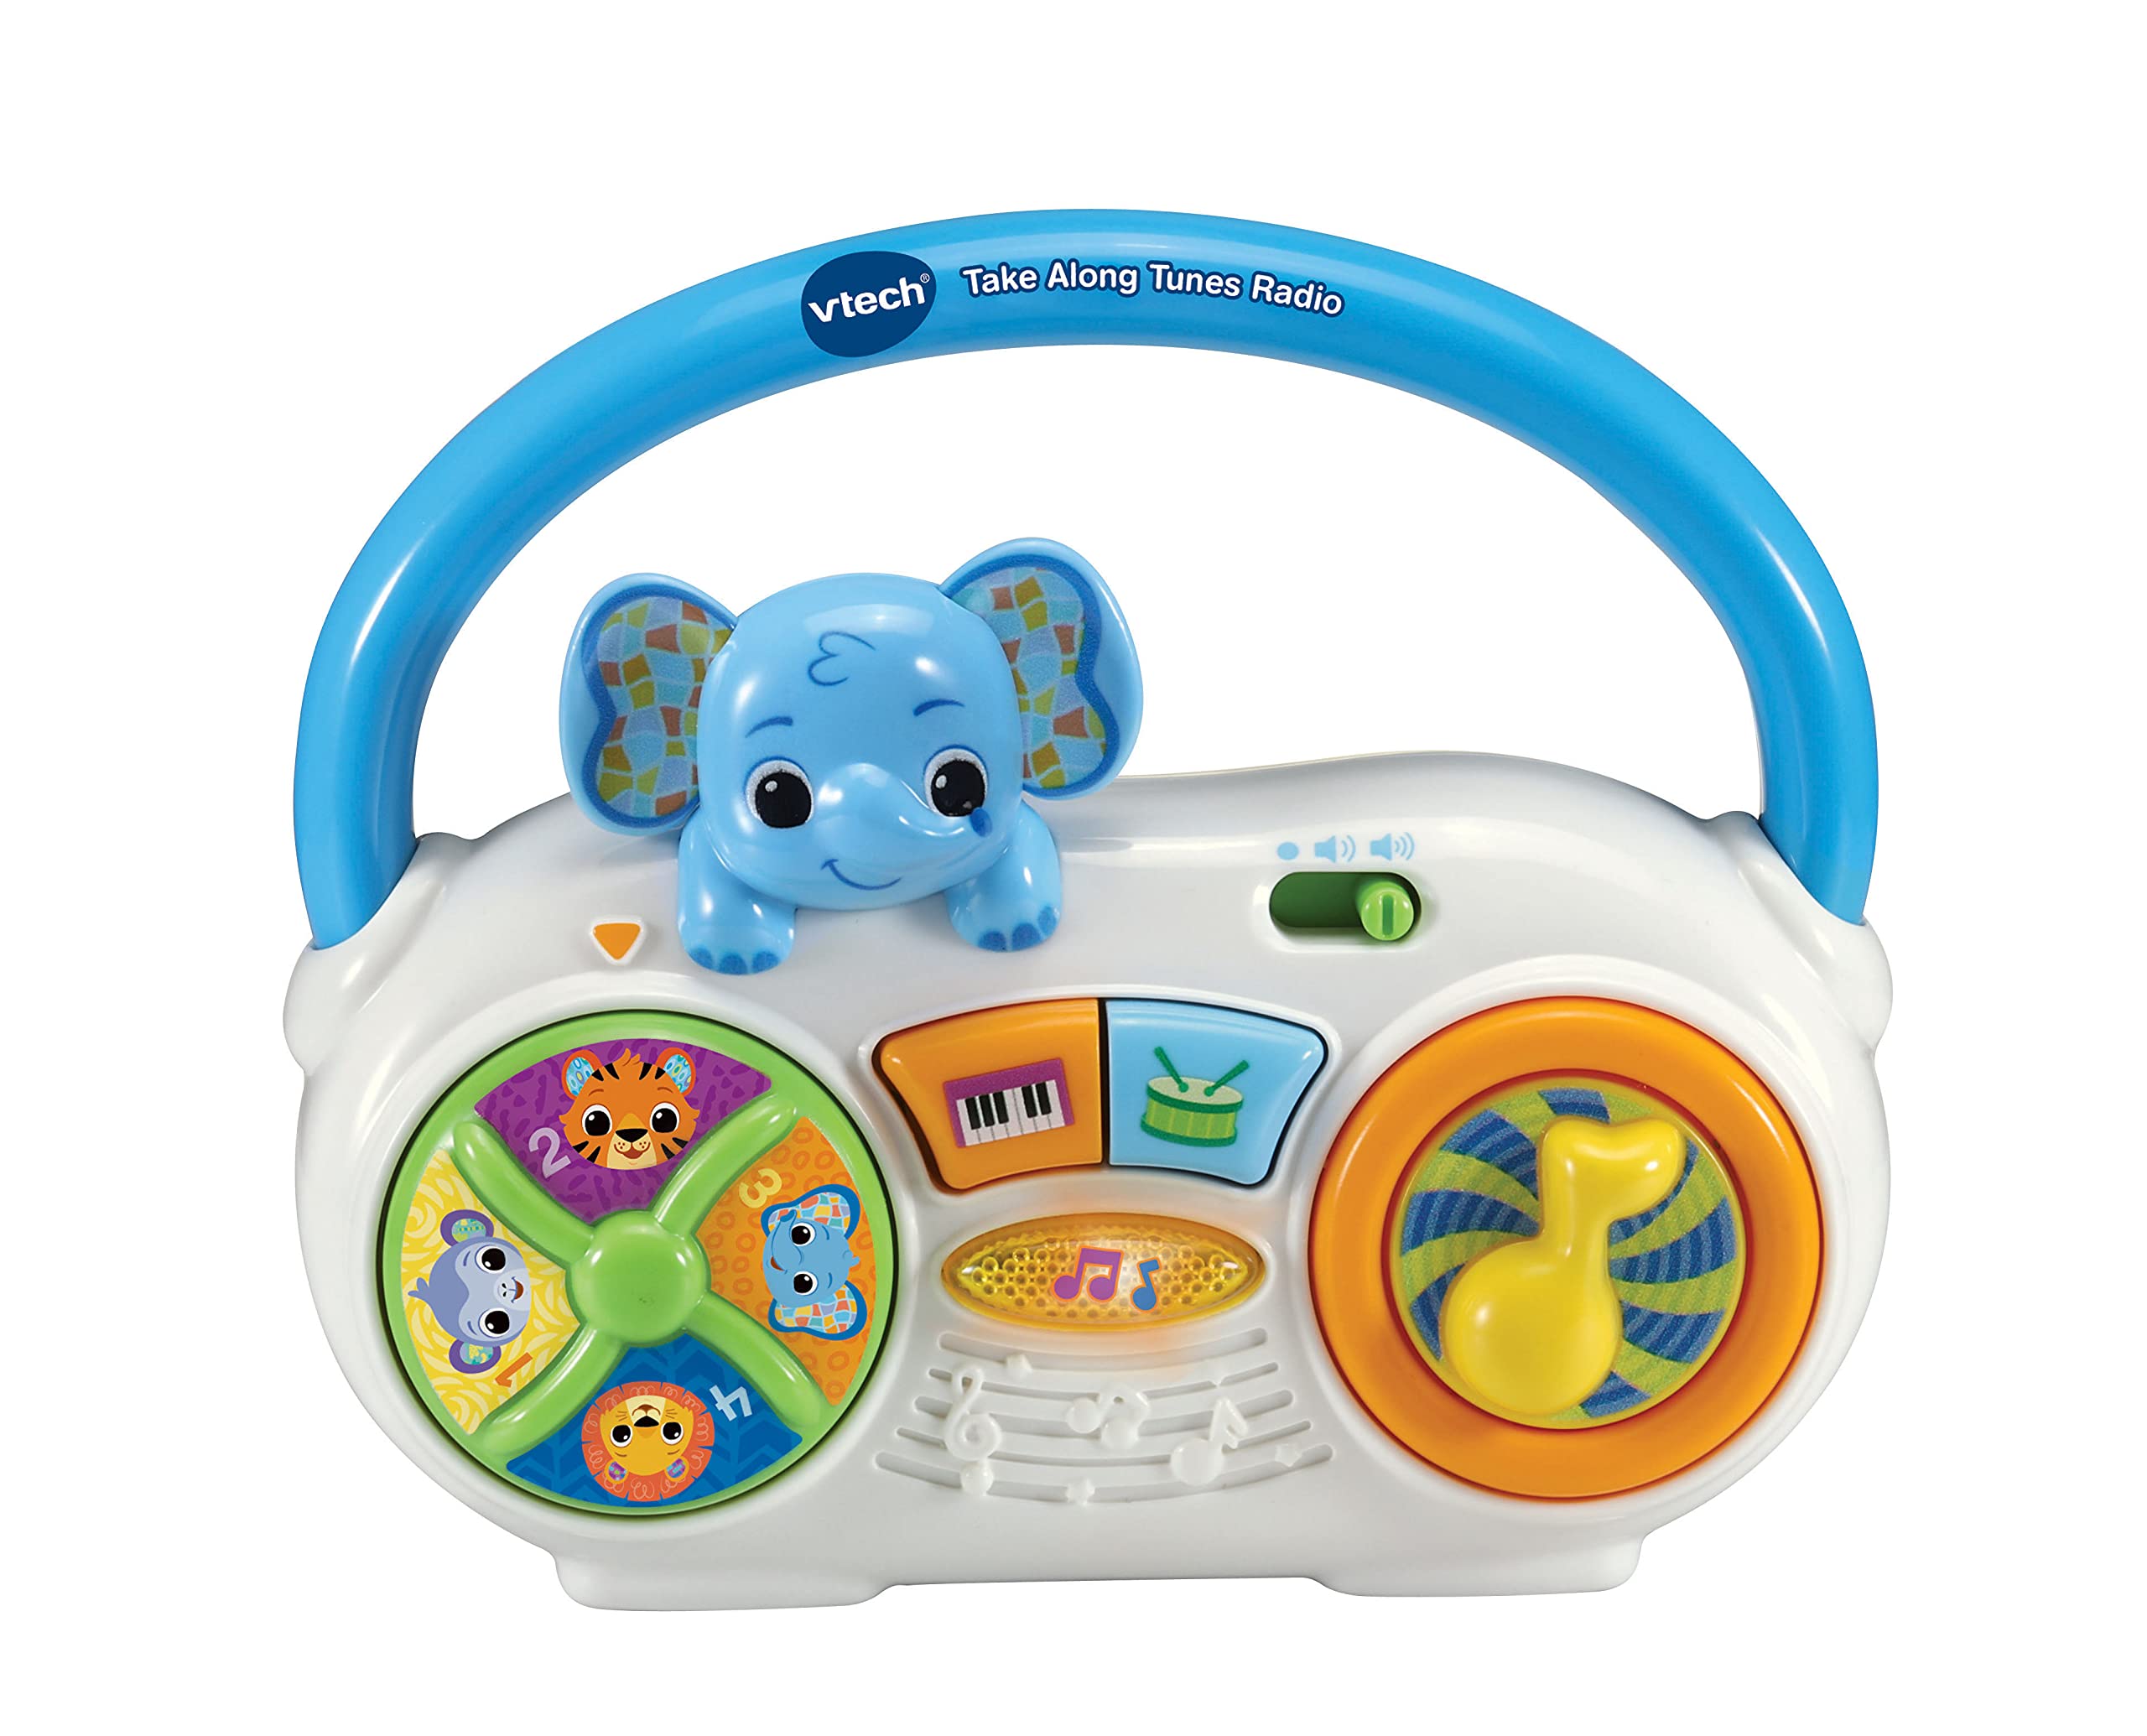 VTech 533303 Baby Take Along Tunes Radio, Mehrfarbig, 1 Count (Pack of 1)